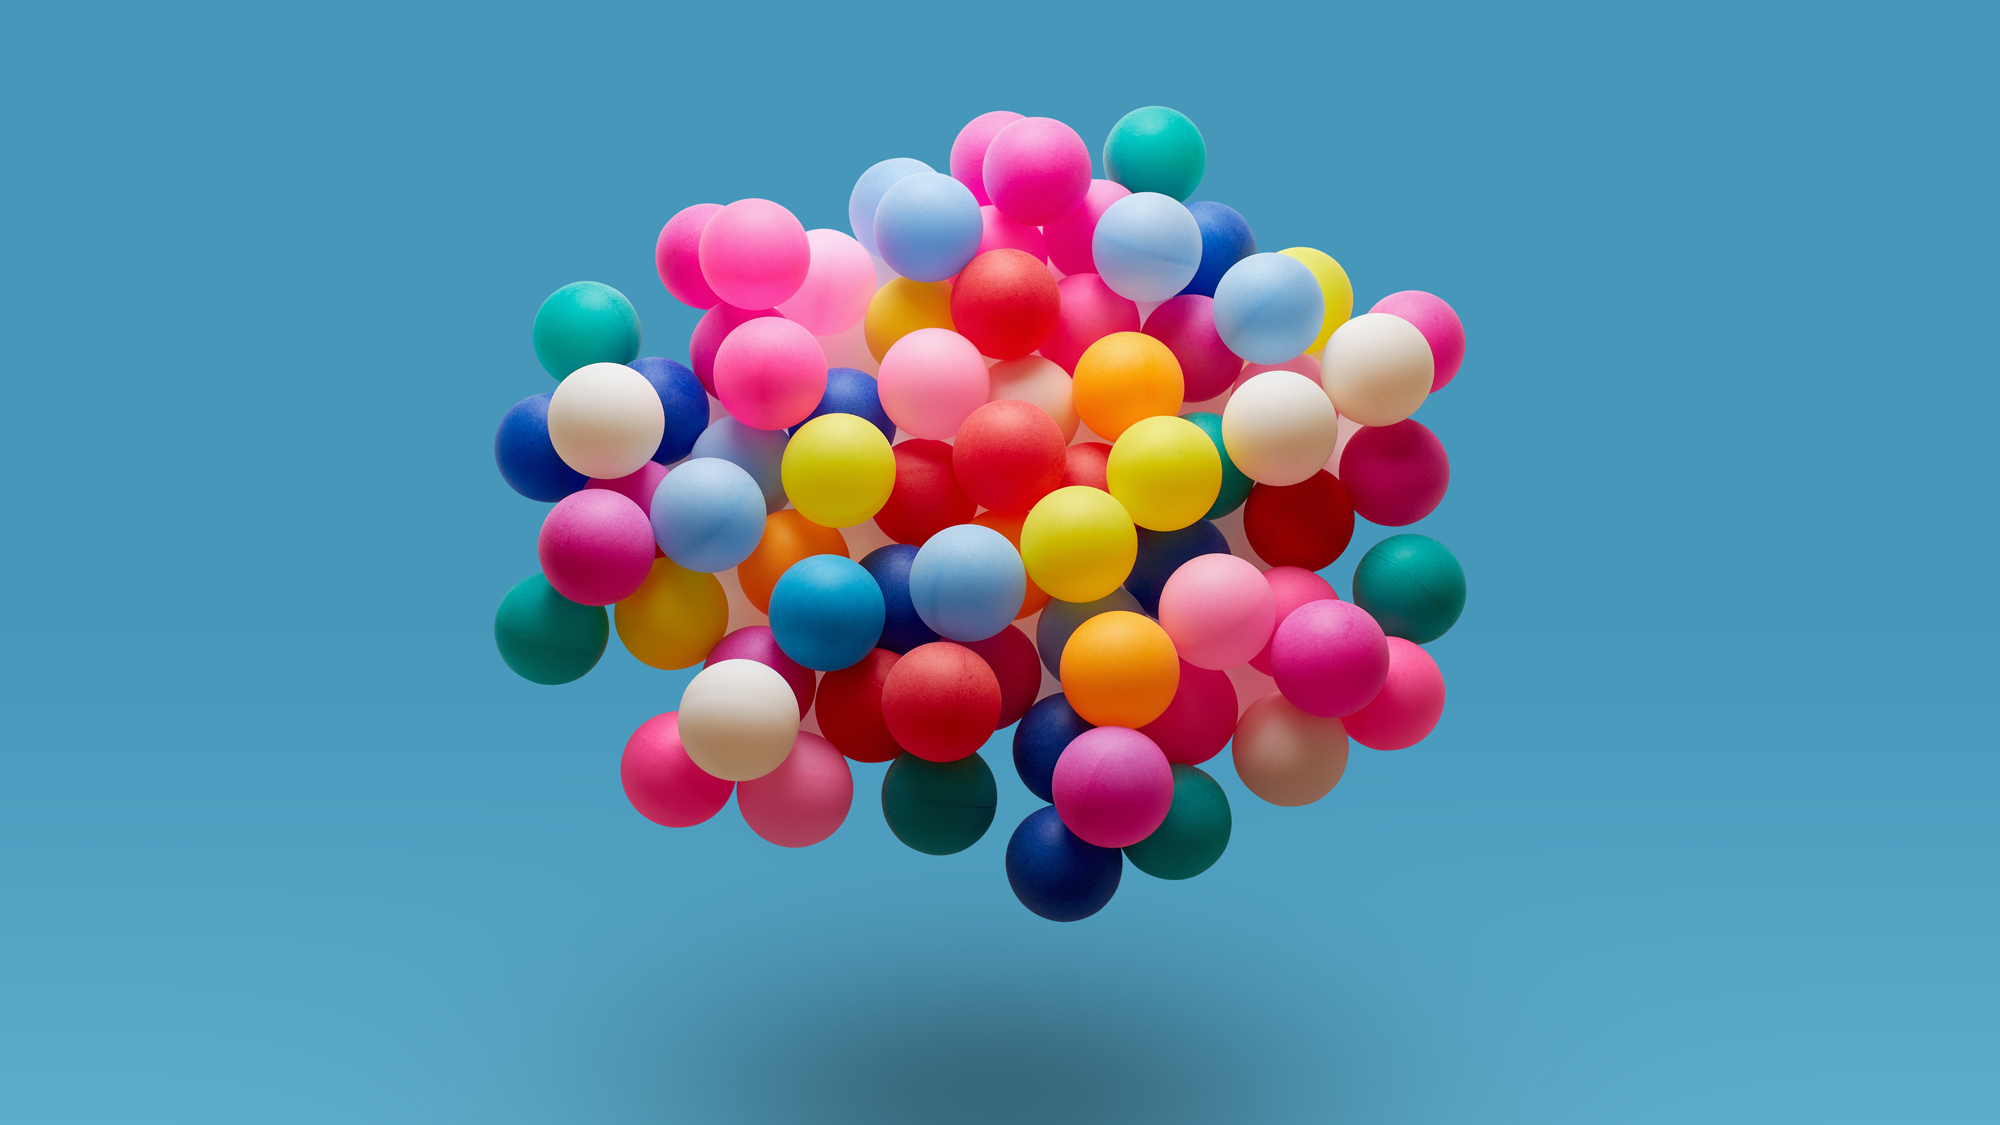 A colourful arrangement of balloons in the shape of a brain.